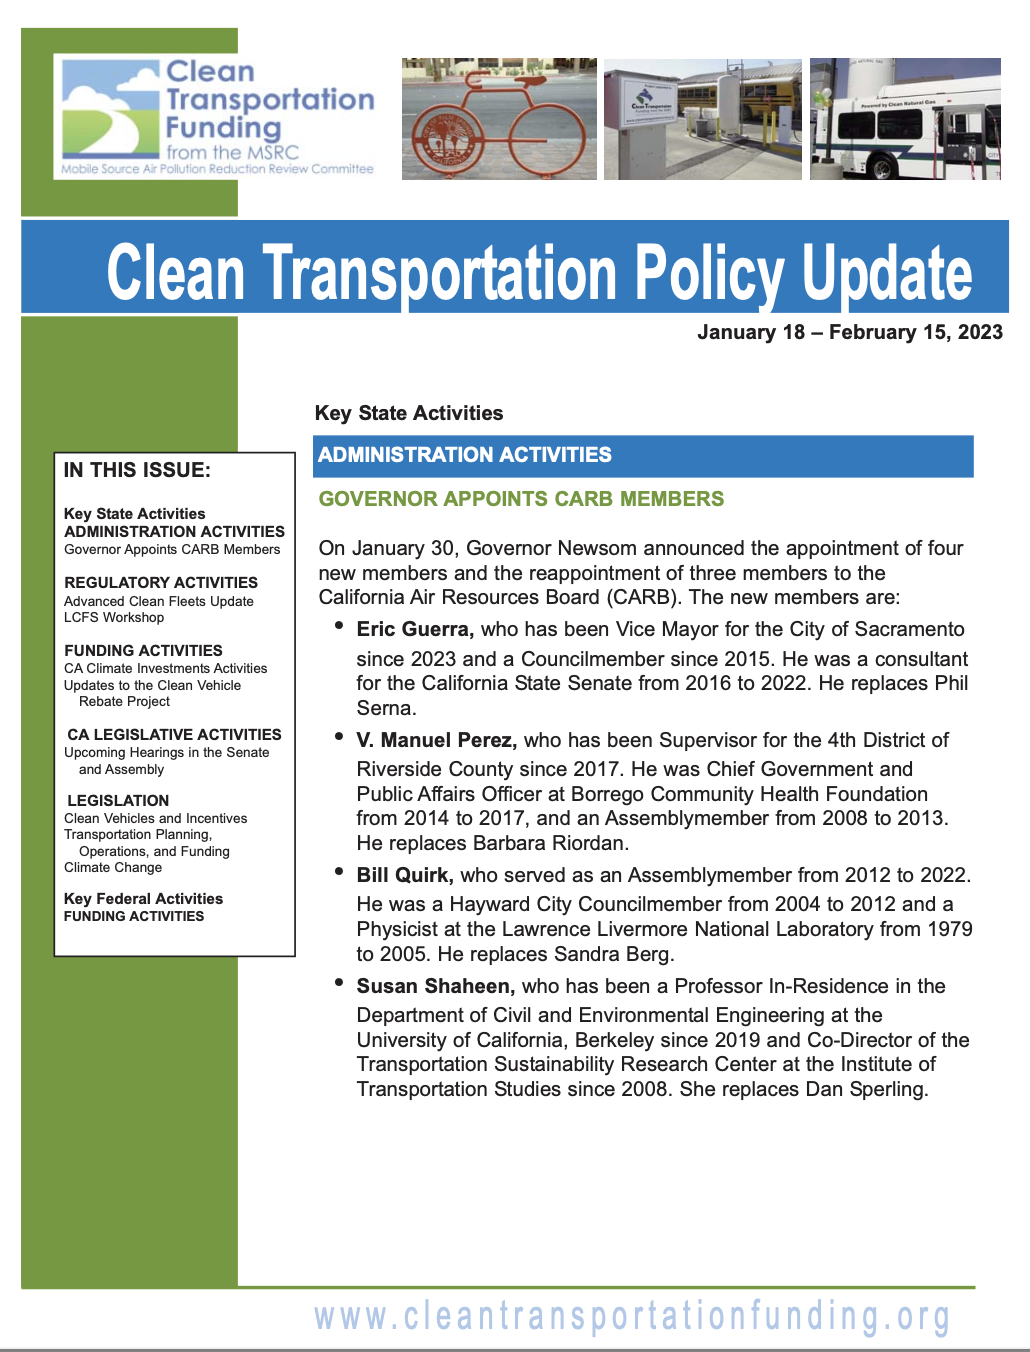 Clean transportation policy update